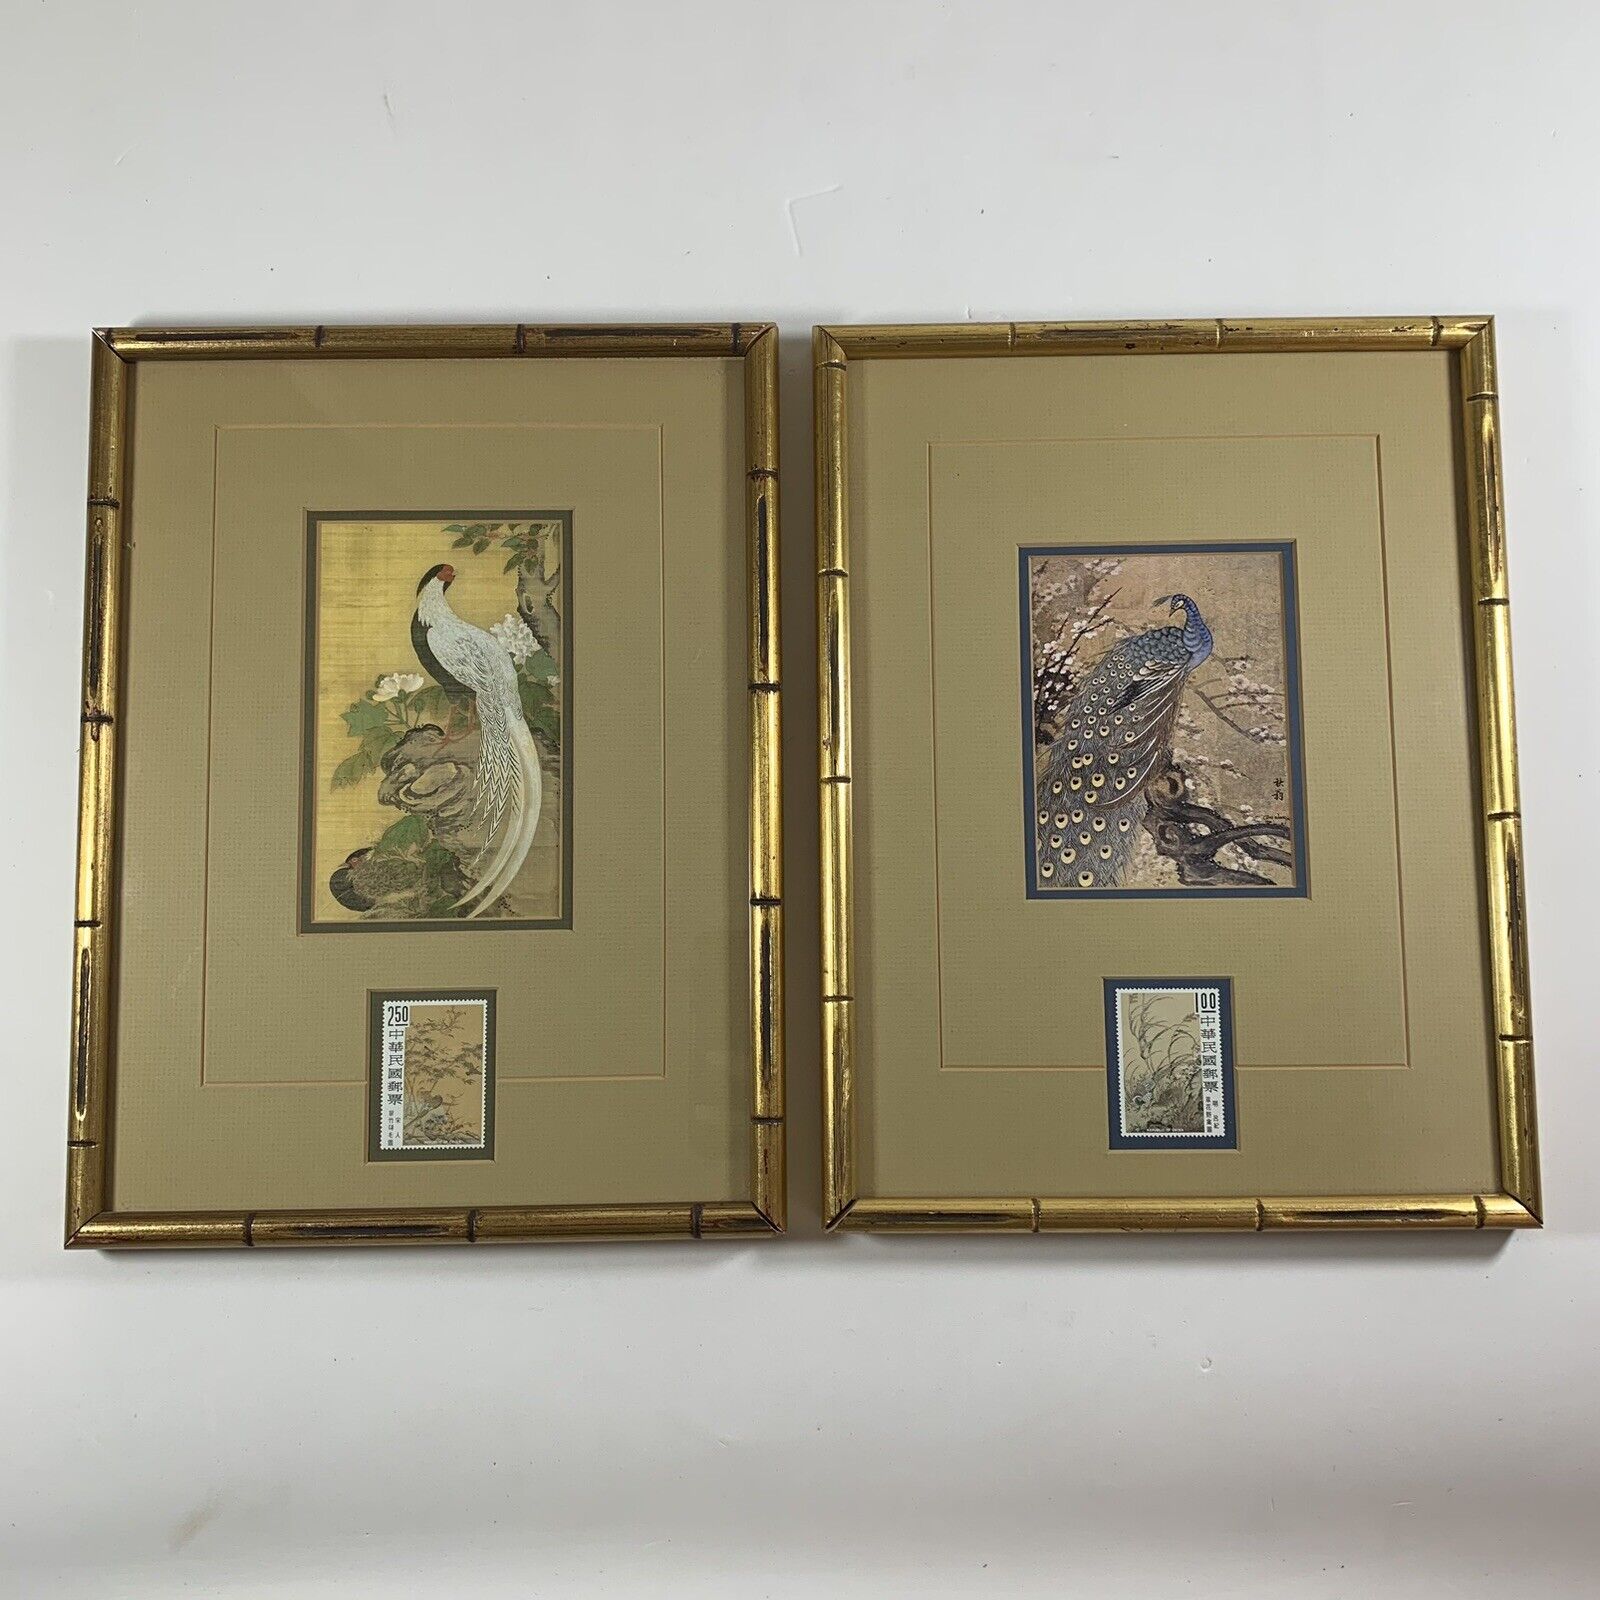 Vintage Chinese Bird Prints & Stamps Bamboo Framed Pair Wall Art (10 x 13)